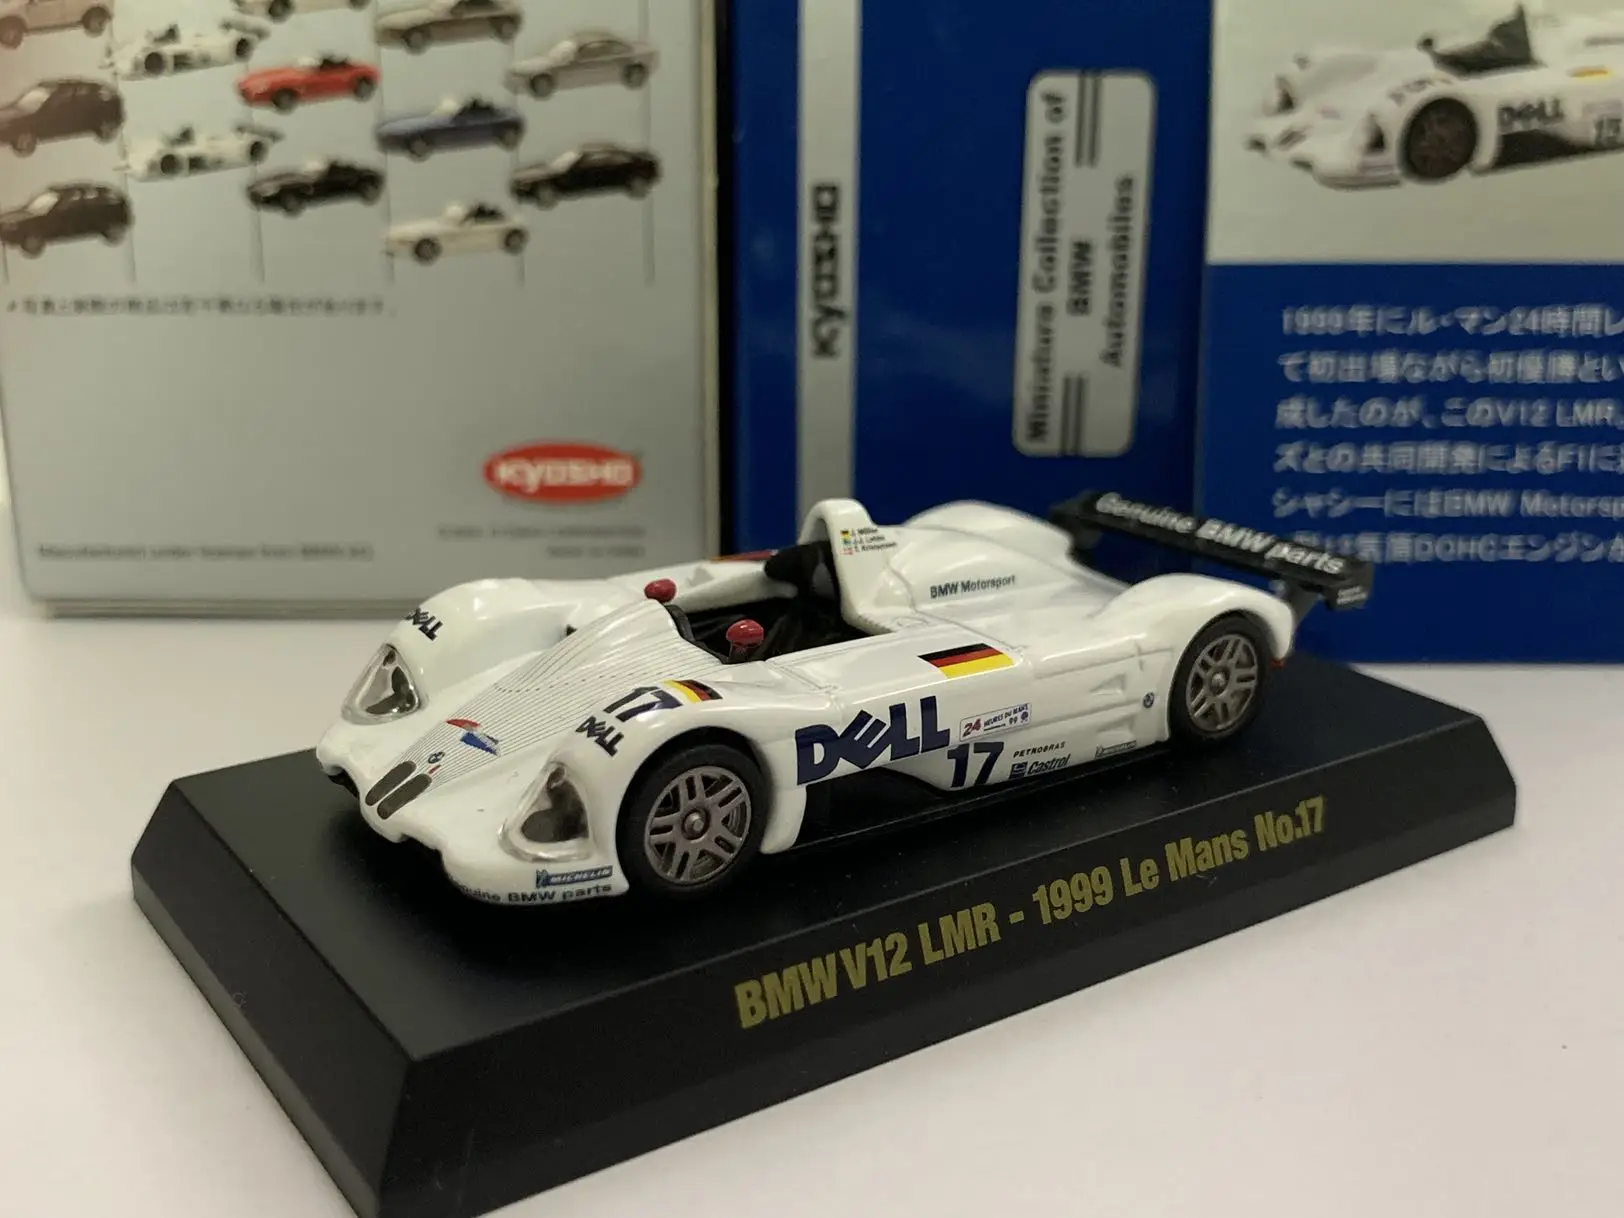 

KYOSHO 1/64 BMW V12 LMR Dell livery #17 Le Mans racing car Collect die casting alloy trolley model